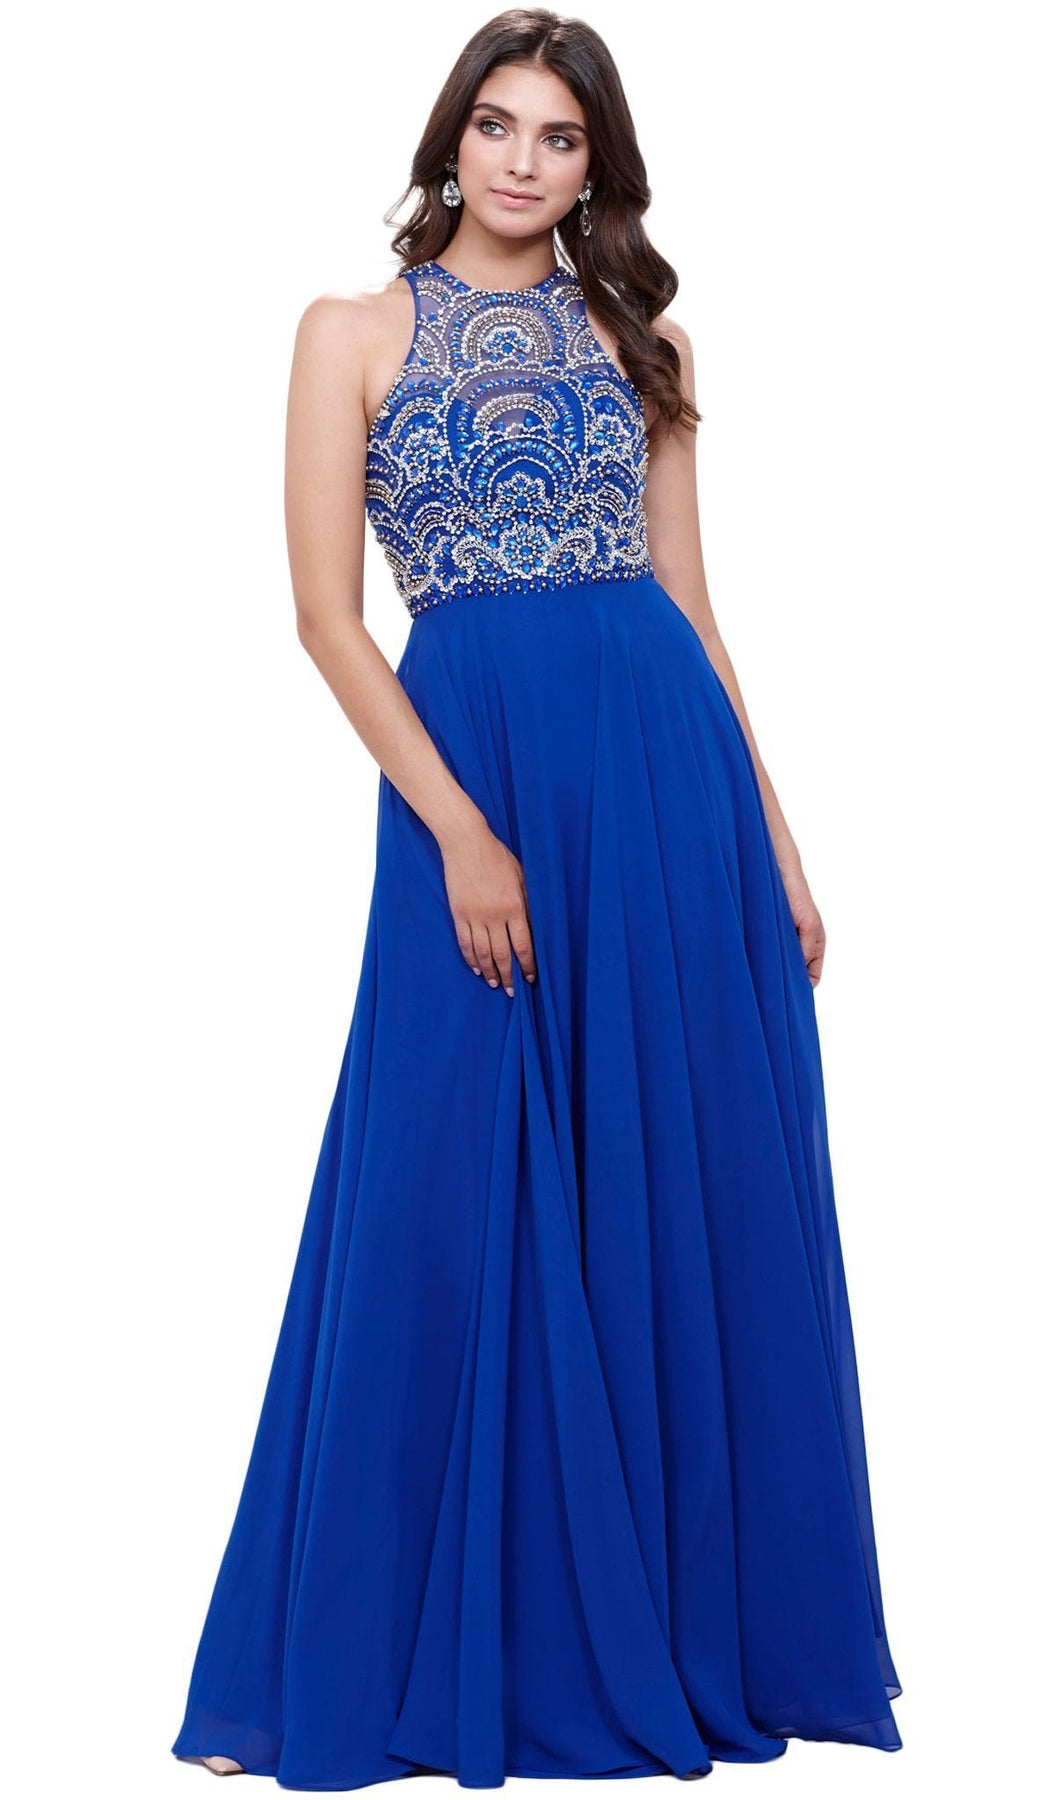 Nox Anabel - 8277 Sleeveless High Neck Beaded Bodice A-line Dress Special Occasion Dress XS / Royal Blue